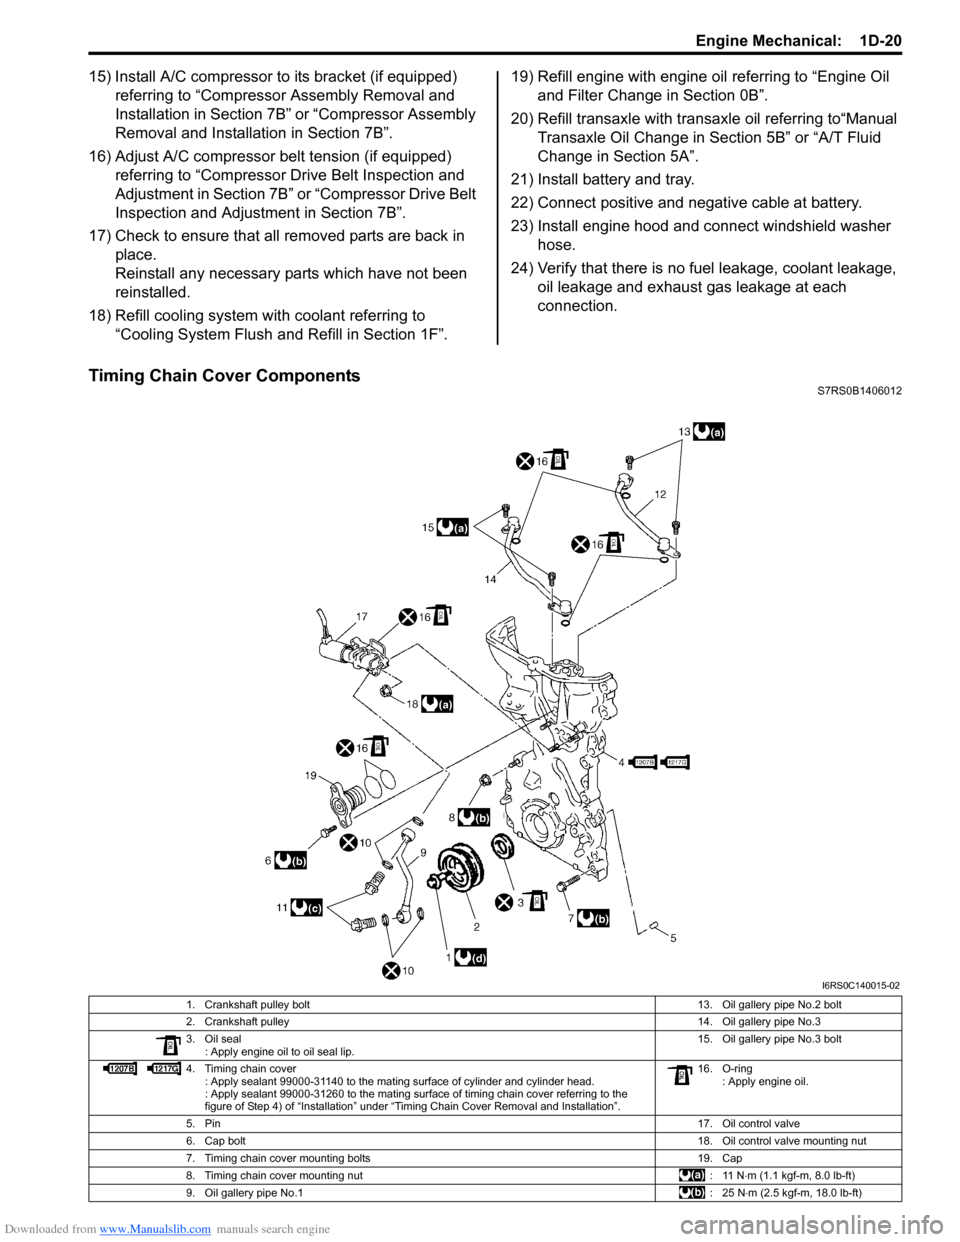 SUZUKI SWIFT 2007 2.G Service Workshop Manual Downloaded from www.Manualslib.com manuals search engine Engine Mechanical:  1D-20
15) Install A/C compressor to its bracket (if equipped) referring to “Compressor Assembly Removal and 
Installation